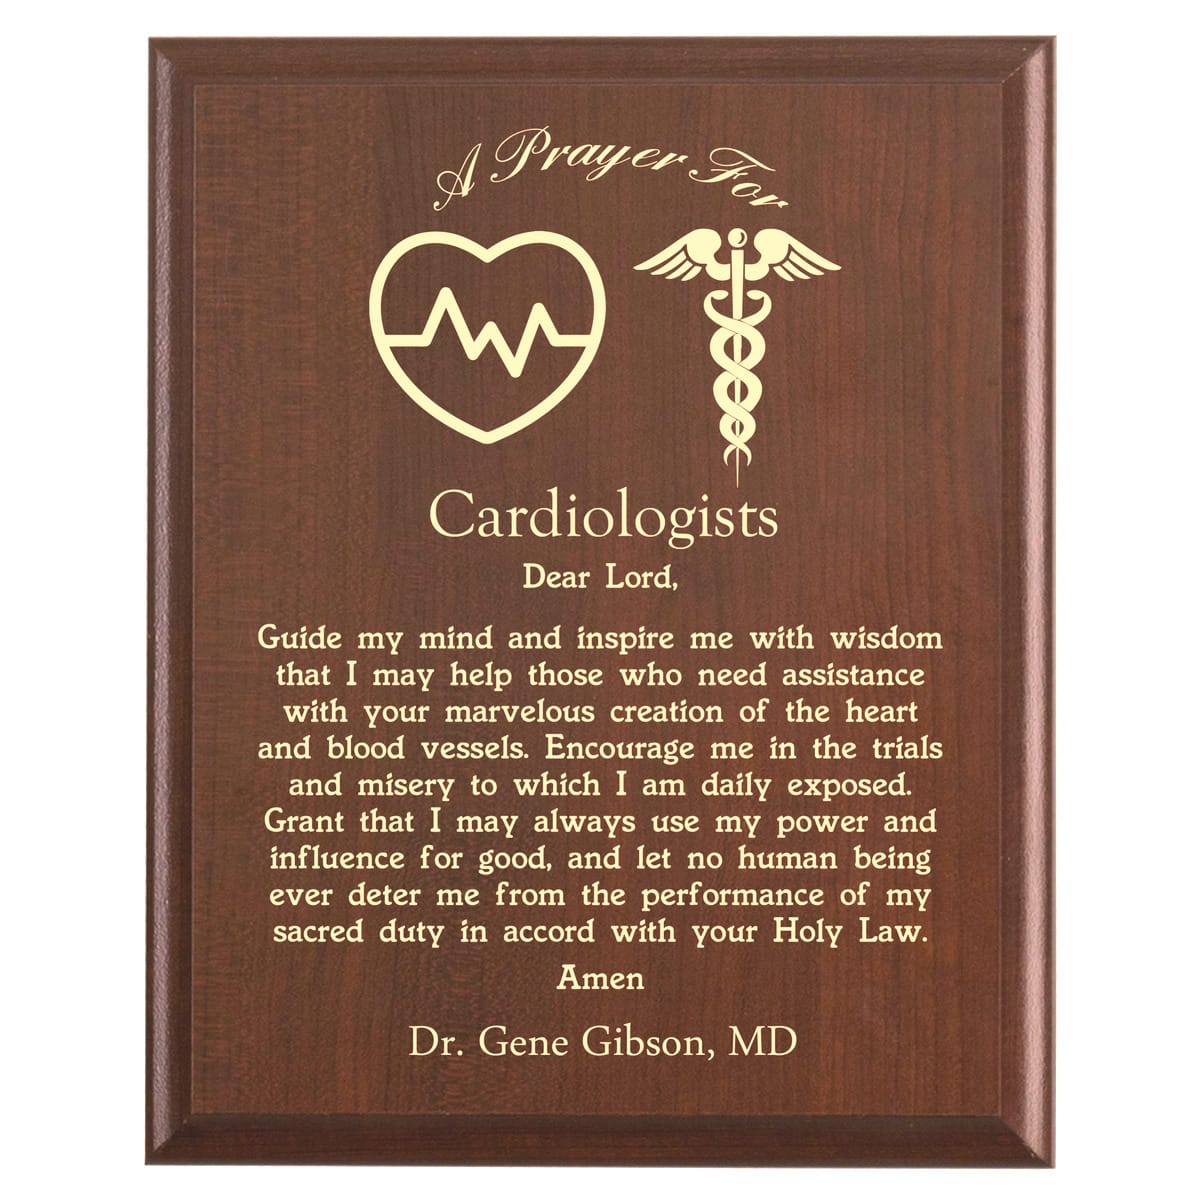 Plaque photo: Cardiologists Prayer Plaque design with free personalization. Wood style finish with customized text.